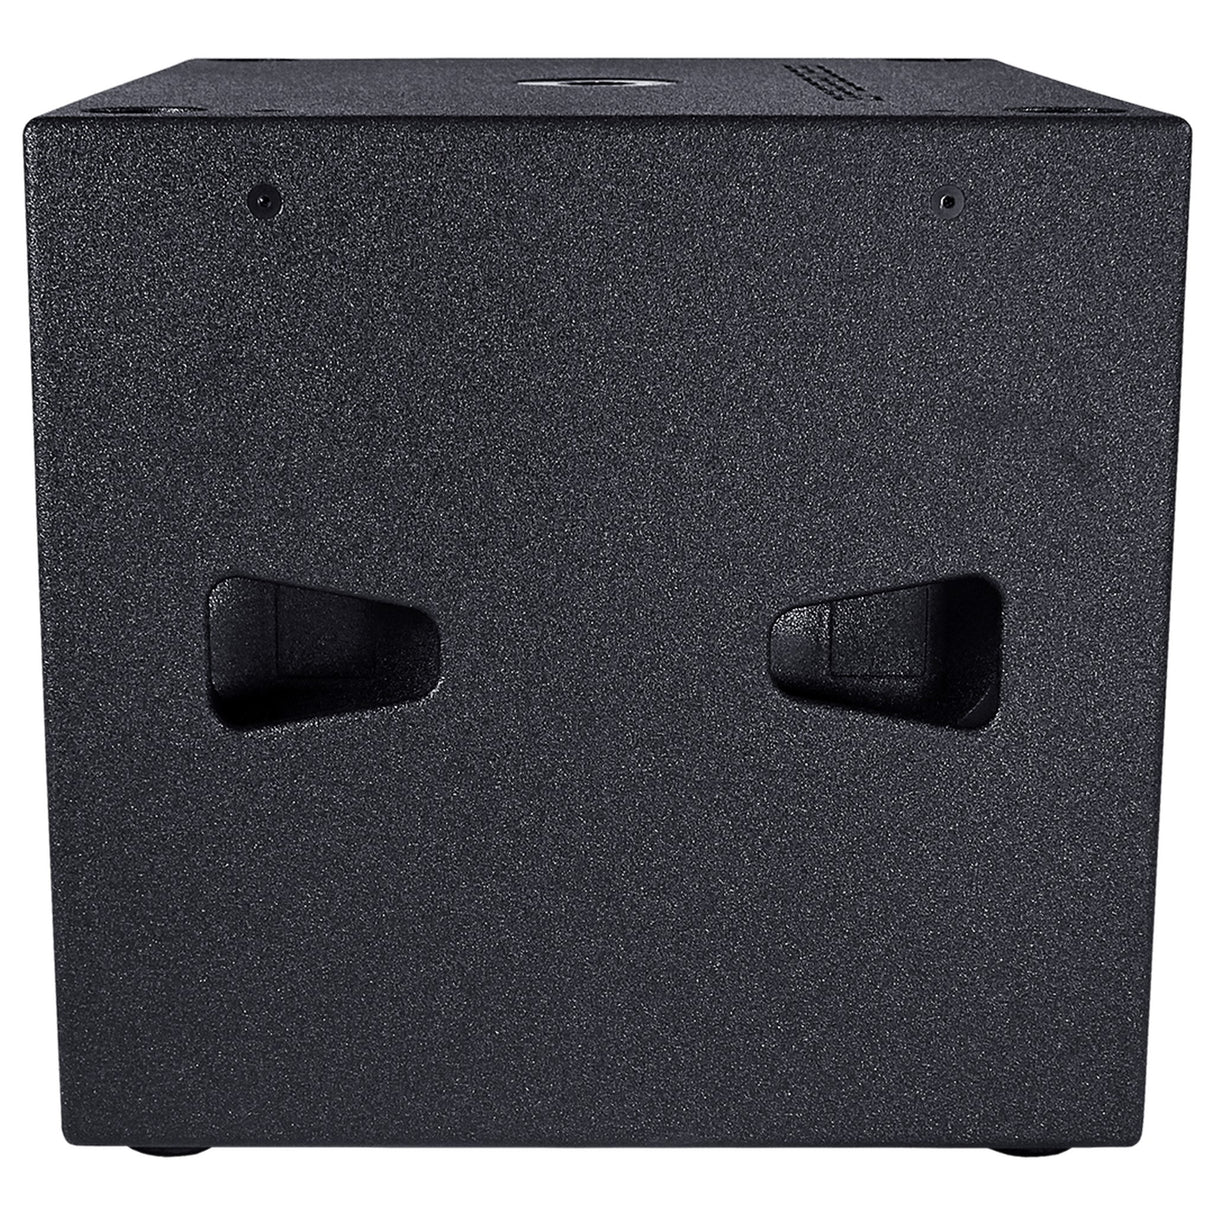 BASSBOSS SSP118-MK3 2500W Single 18-Inch Powered Vented Direct-Radiating Subwoofer